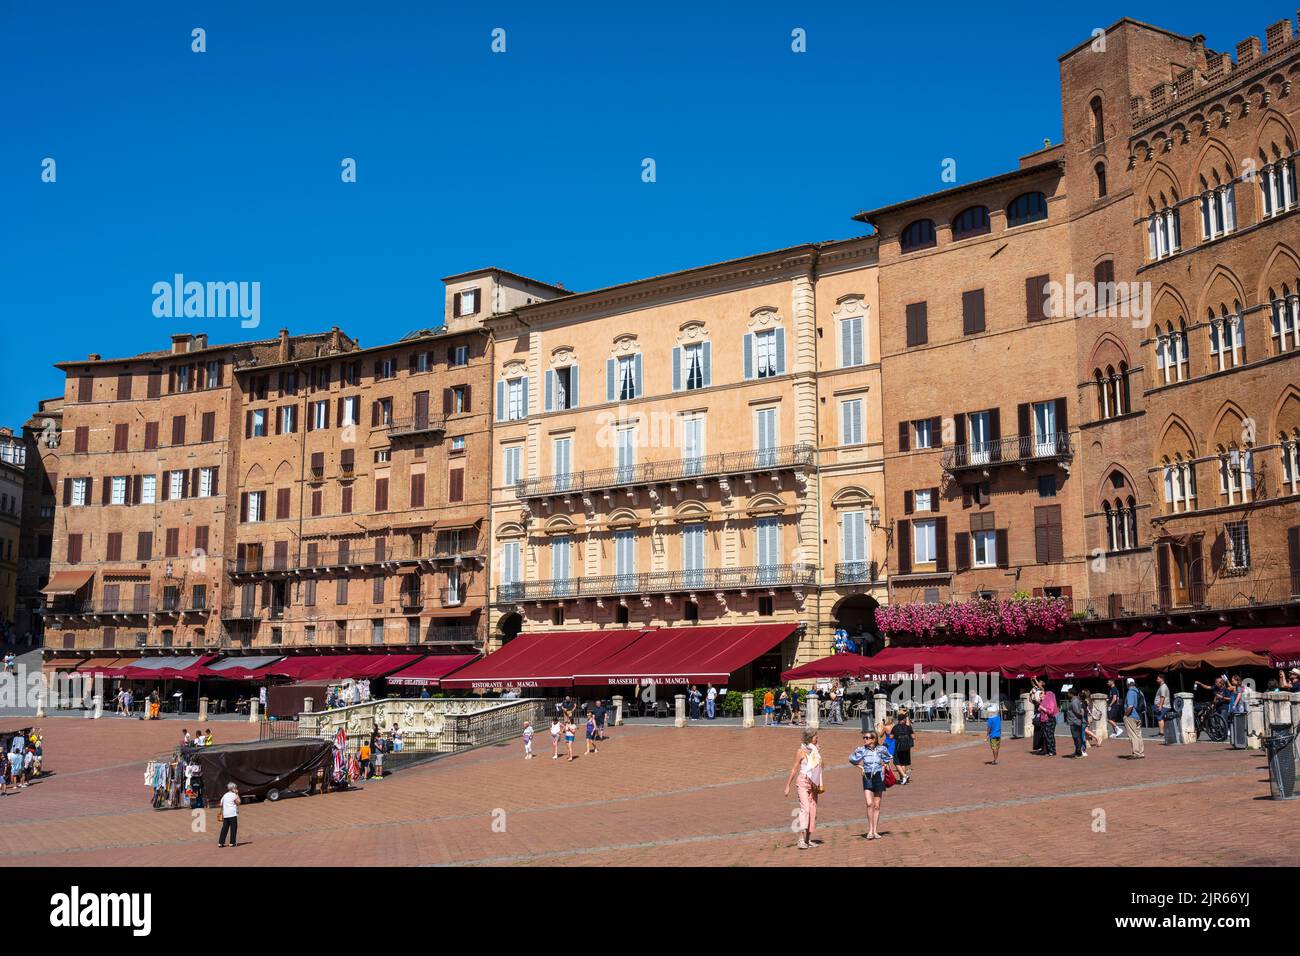 Medieval buildings surrounding Piazza del Campo in Siena, Tuscany, Italy Stock Photo